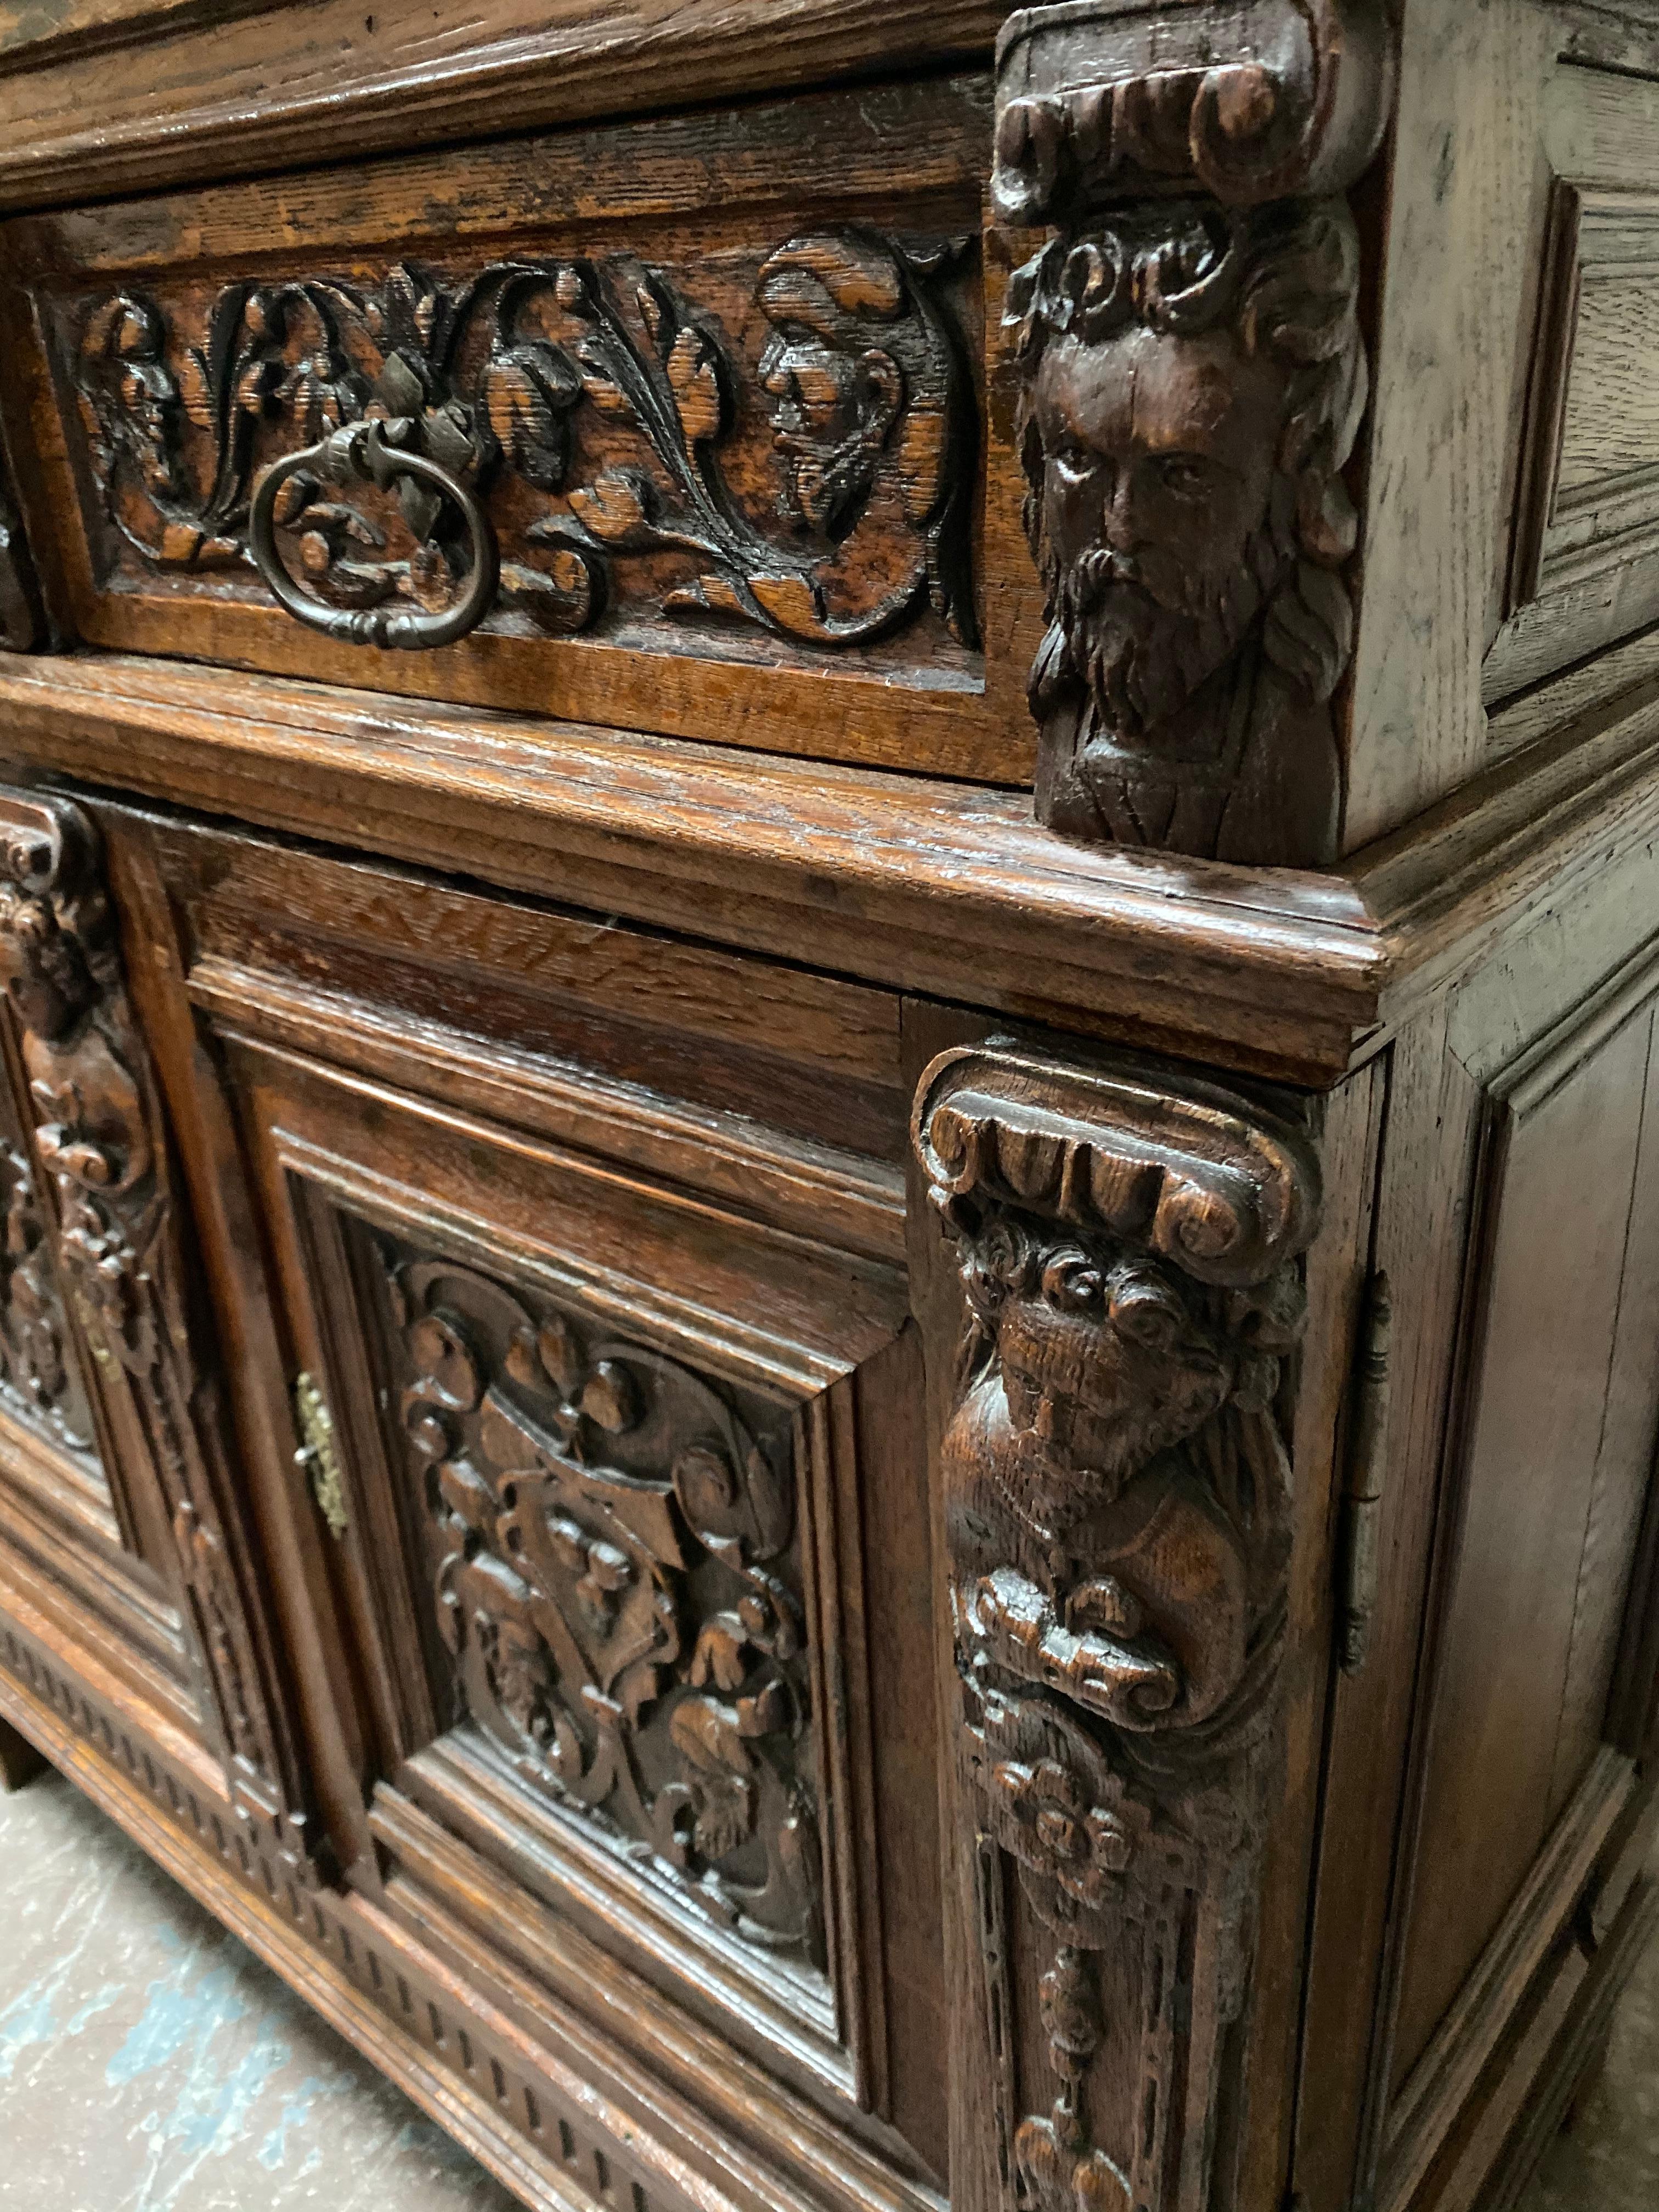 This neatly carved Spanish server dates back to 1780 and is made of oakwood.

Measurements: 19